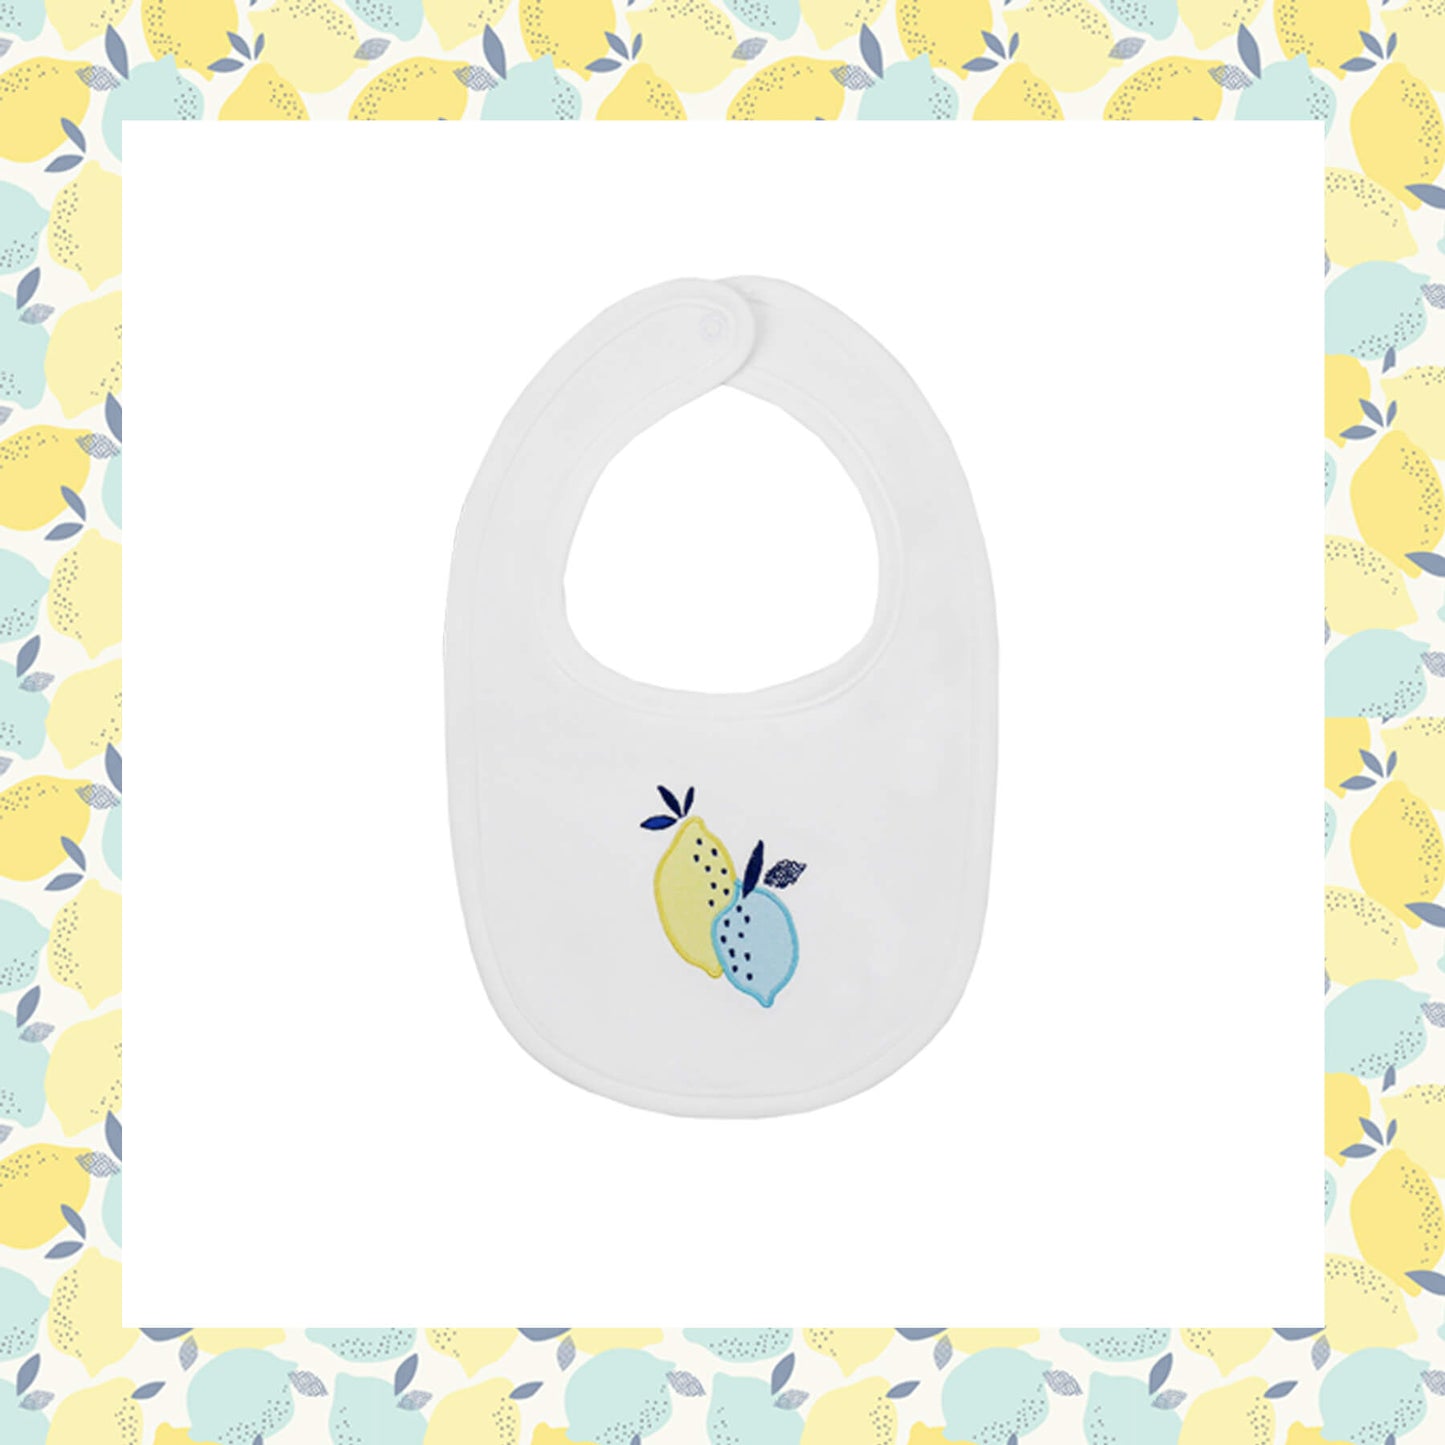 Zest is Best (White) Bib from Little BB Love - Stylish and Comfortably Soft Baby Clothing Store